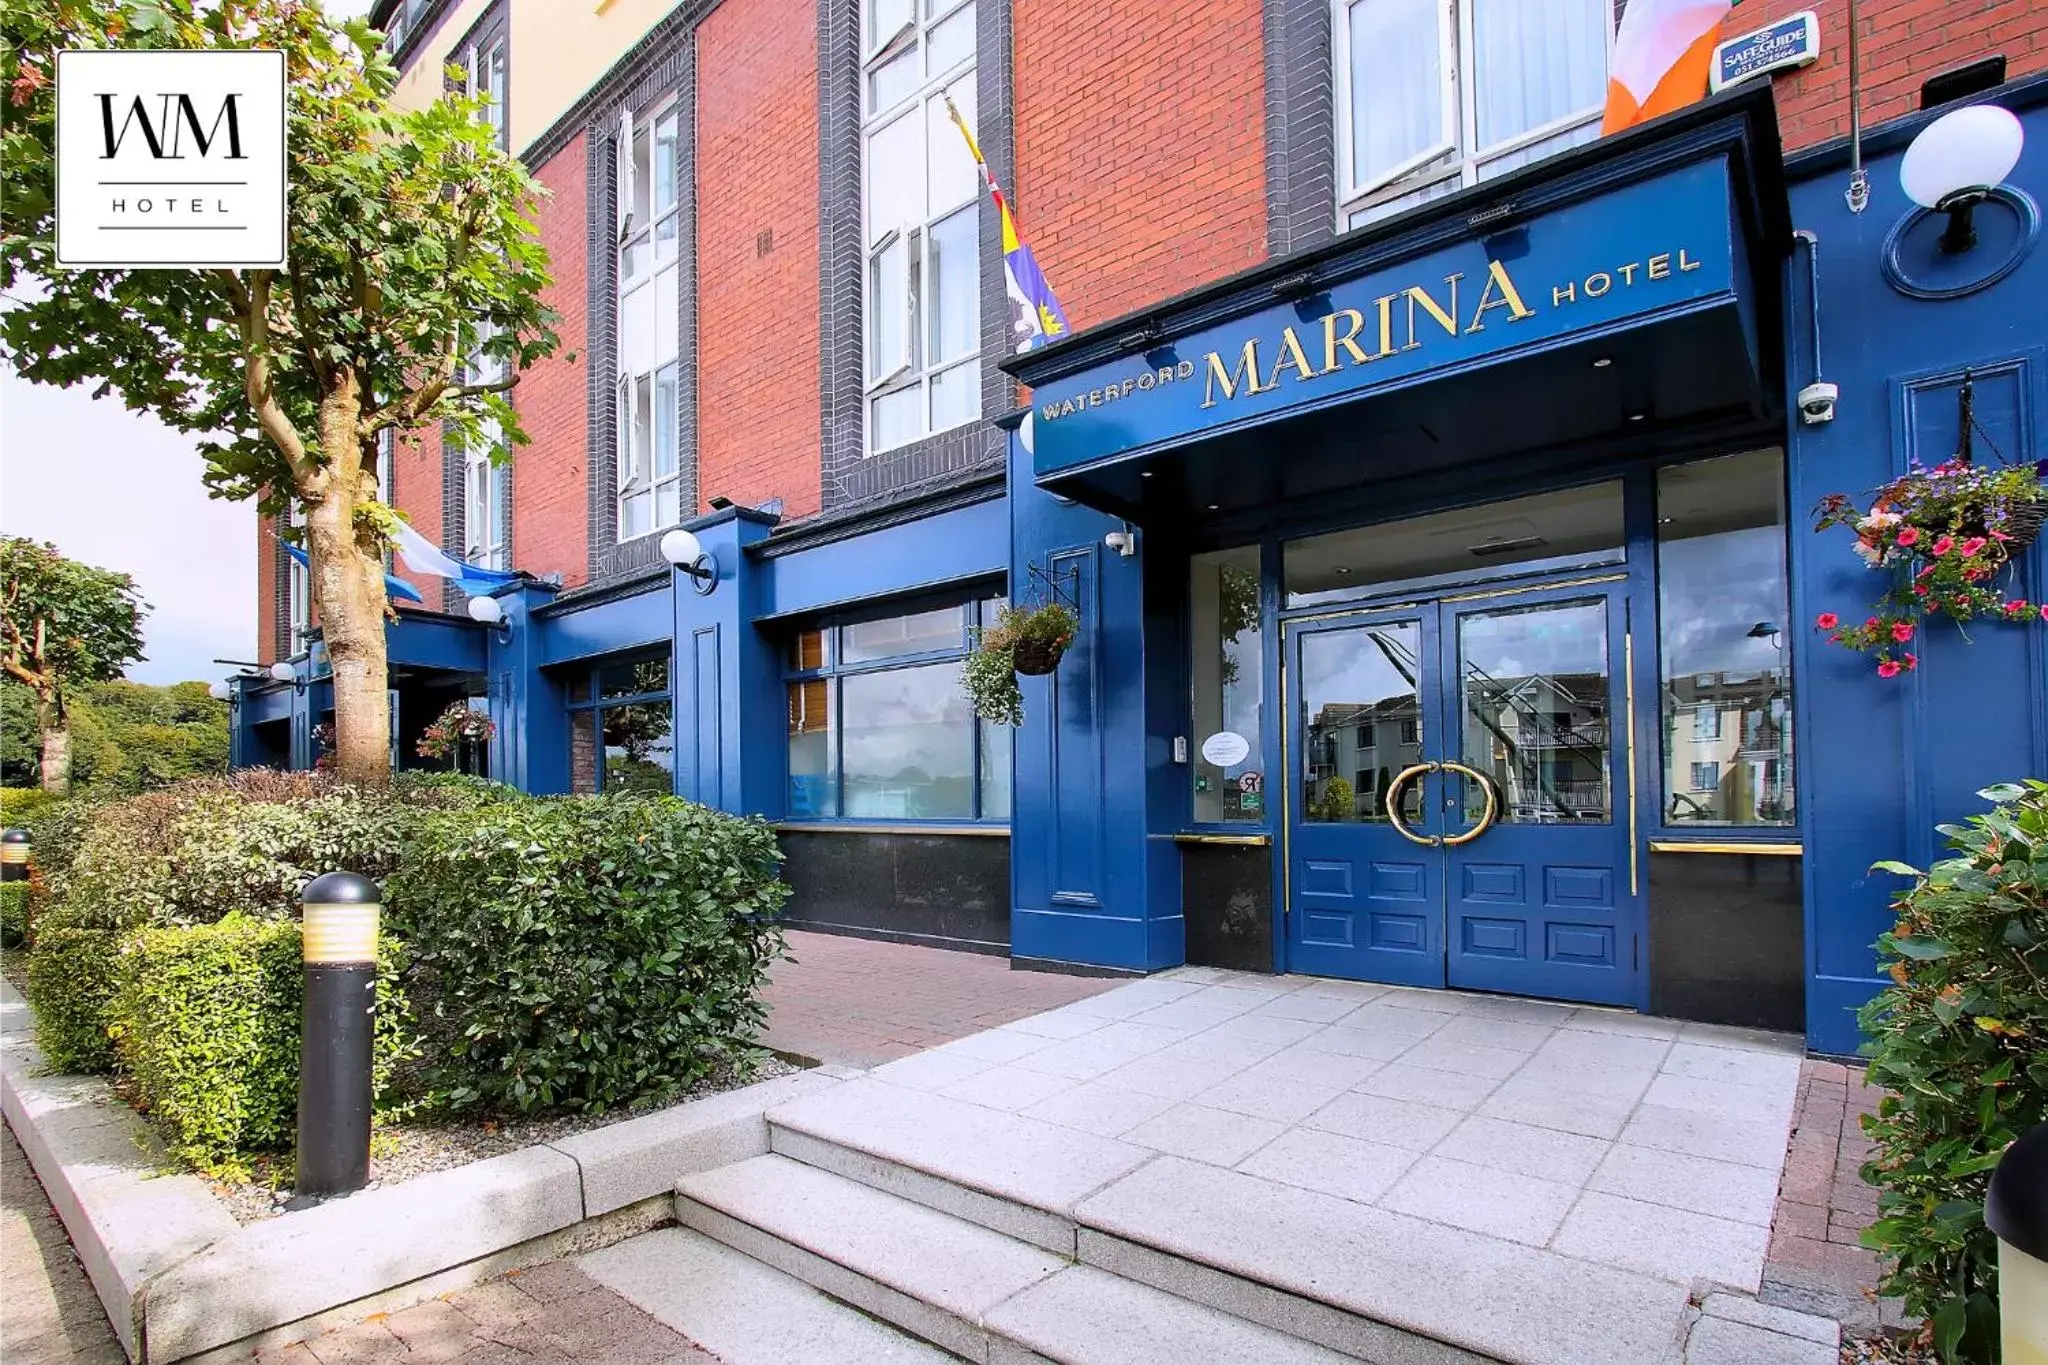 Property building in Waterford Marina Hotel